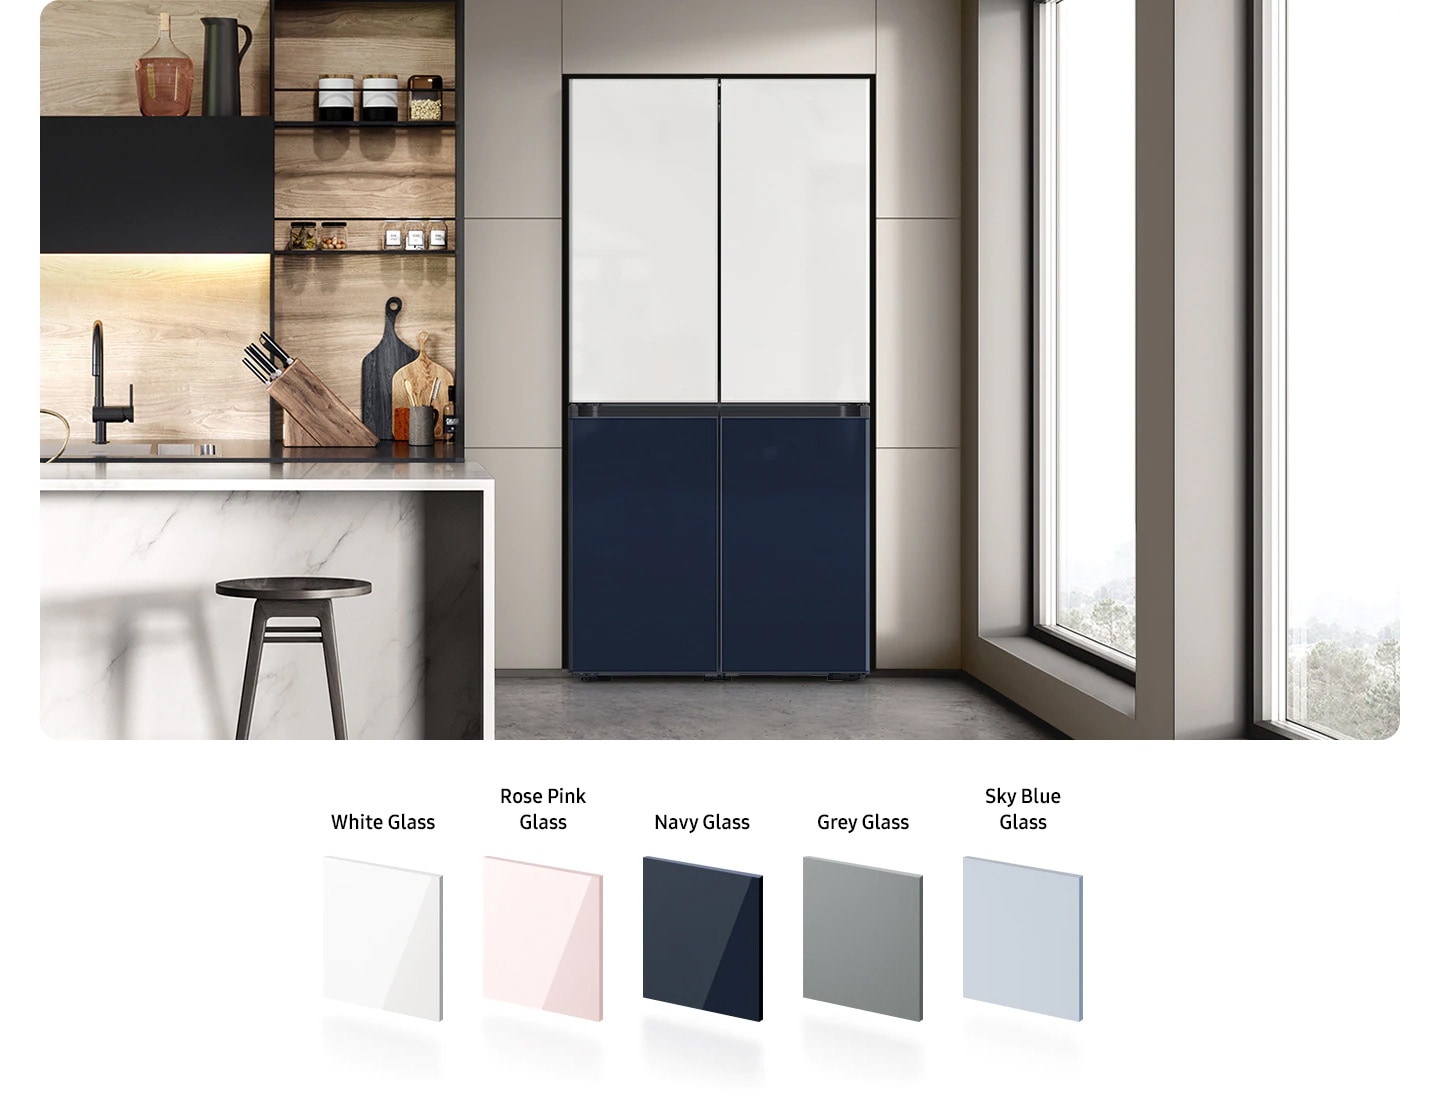 The colors on each of the 4 front panels of the Bespoke refrigerator alternate between the 8 options lined up at the bottom - Matte Black Steel, Champagne Steel, Navy Steel, White Glass, Rose Pink Glass, Navy Glass, Grey Glass, Sky Blue Glass.